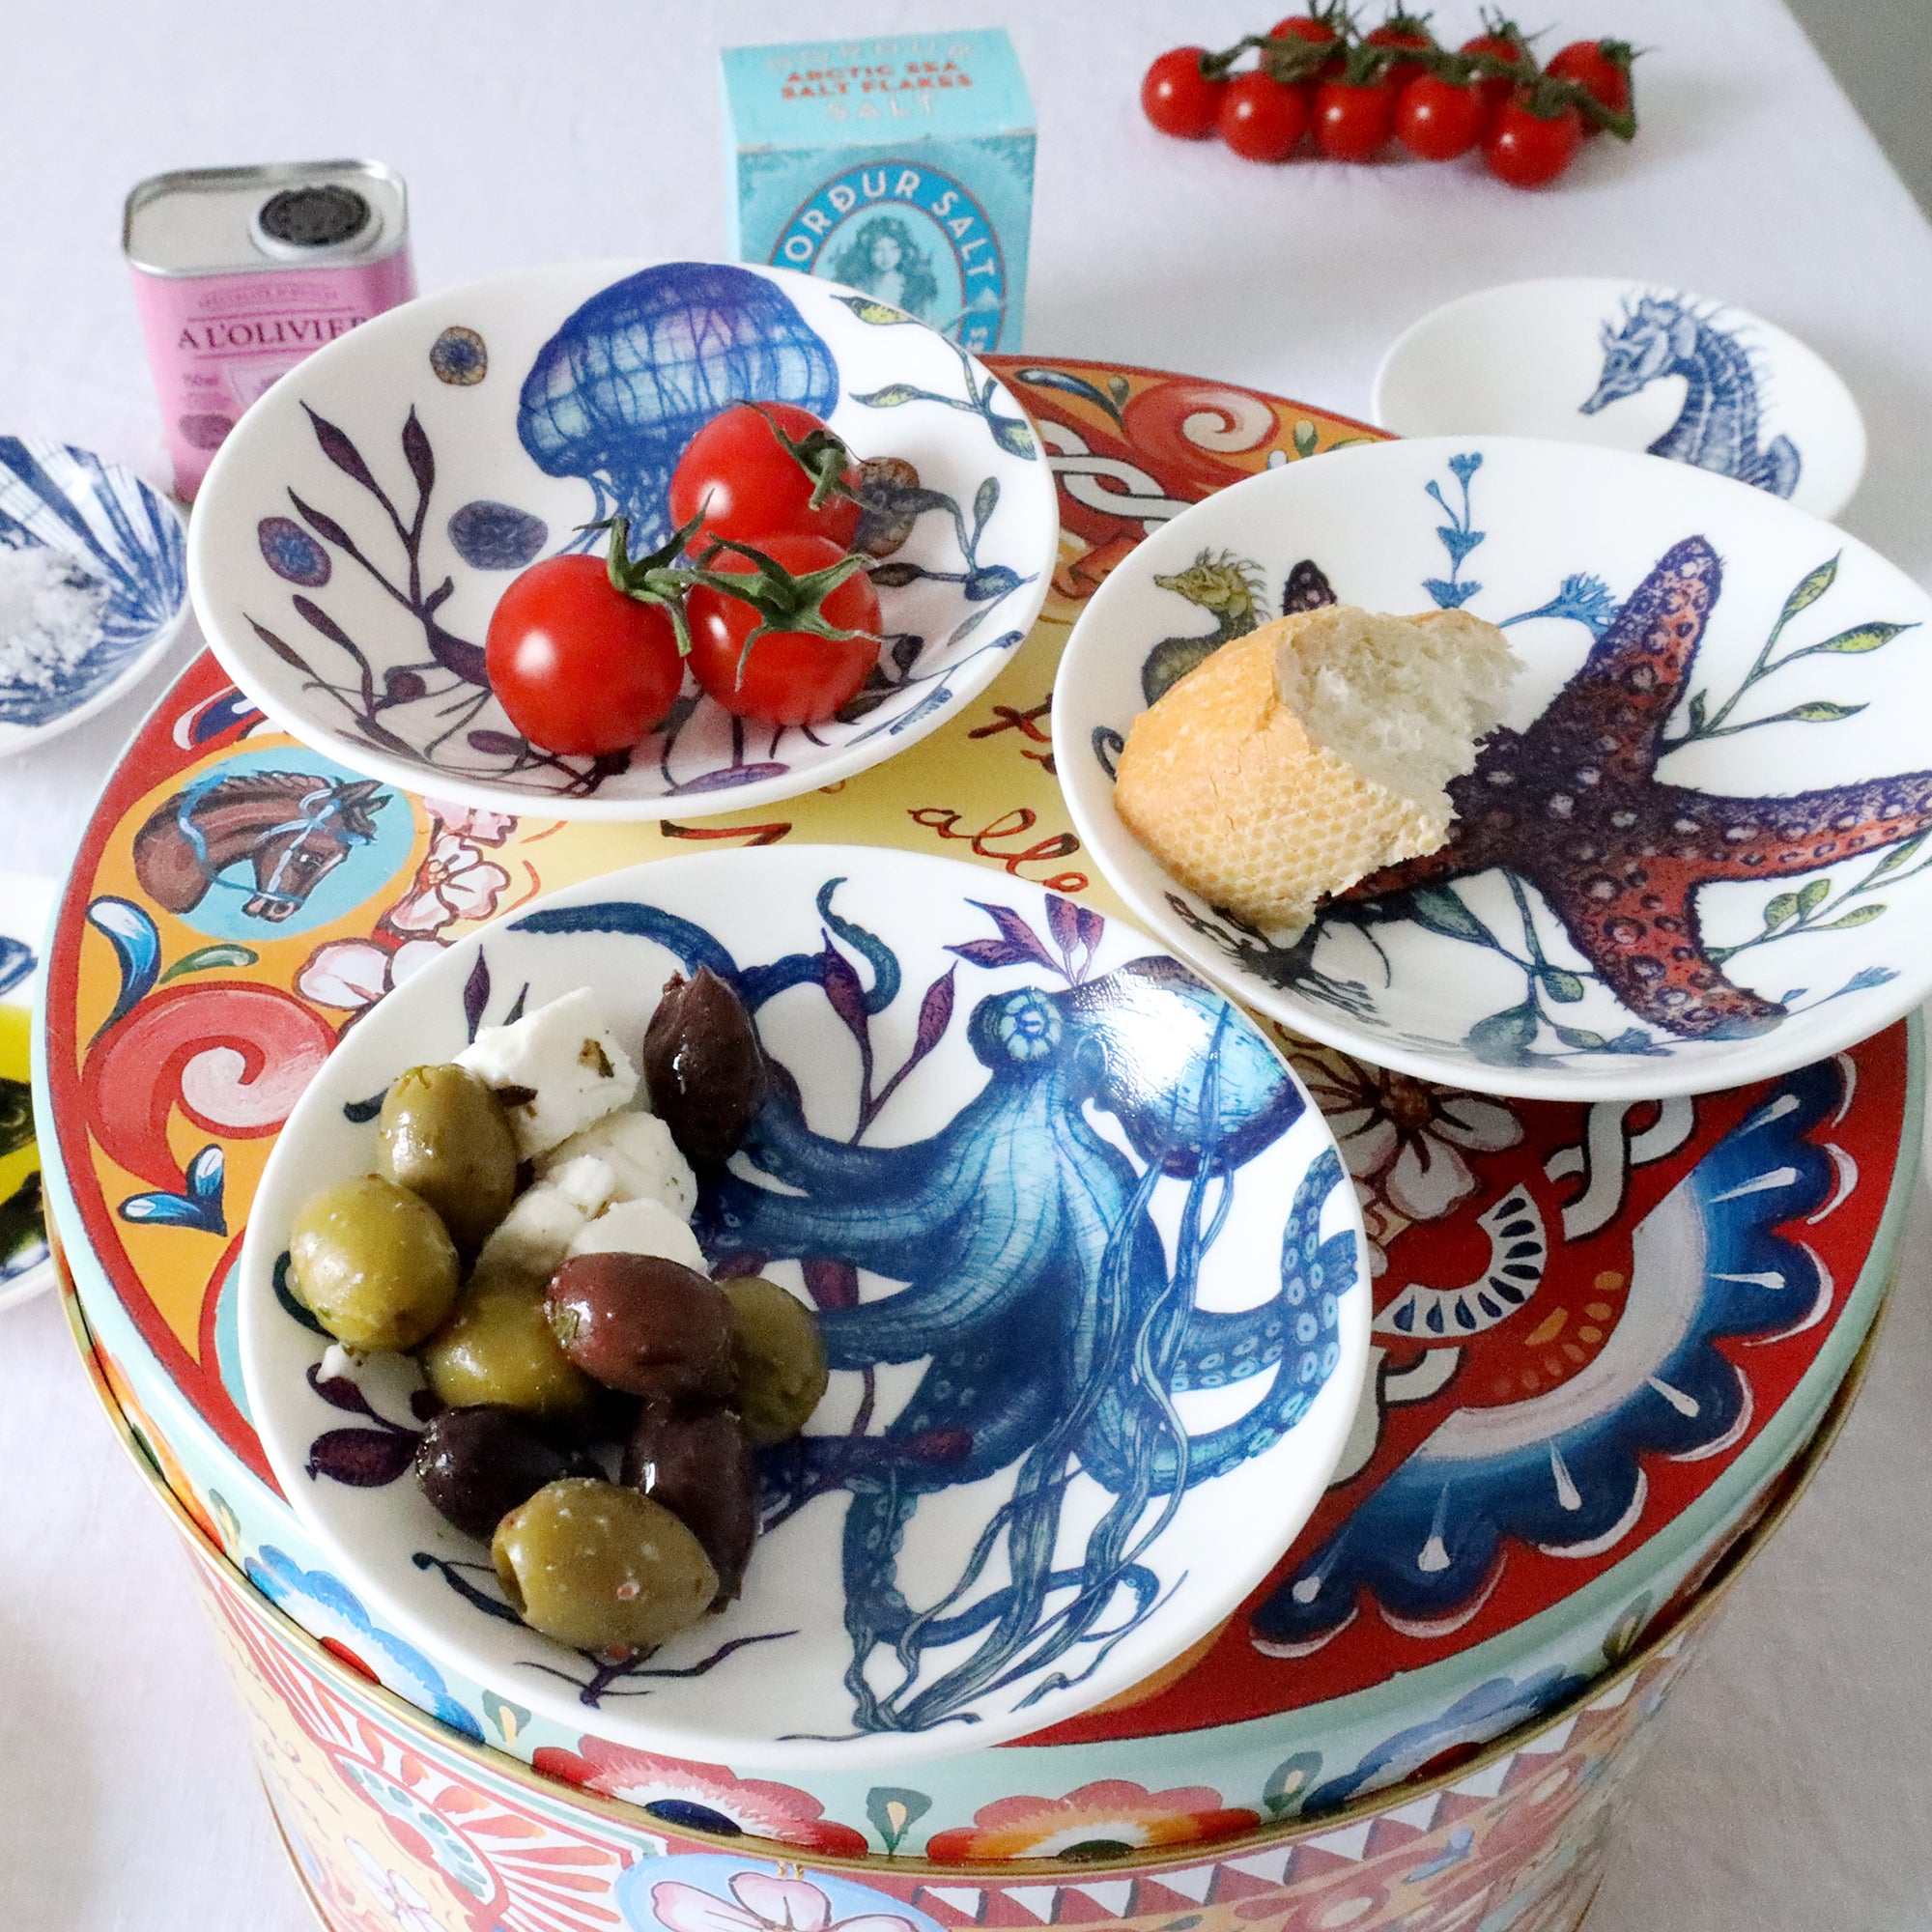 Nibbles bowl in Bone China in our colourful Reef range in the Jellyfish design placed on a brightly coloured tin with other nibbles bowls from our Reef range.All bowls have olives,bread ,tomatoes in.In the background you can see other items on the table